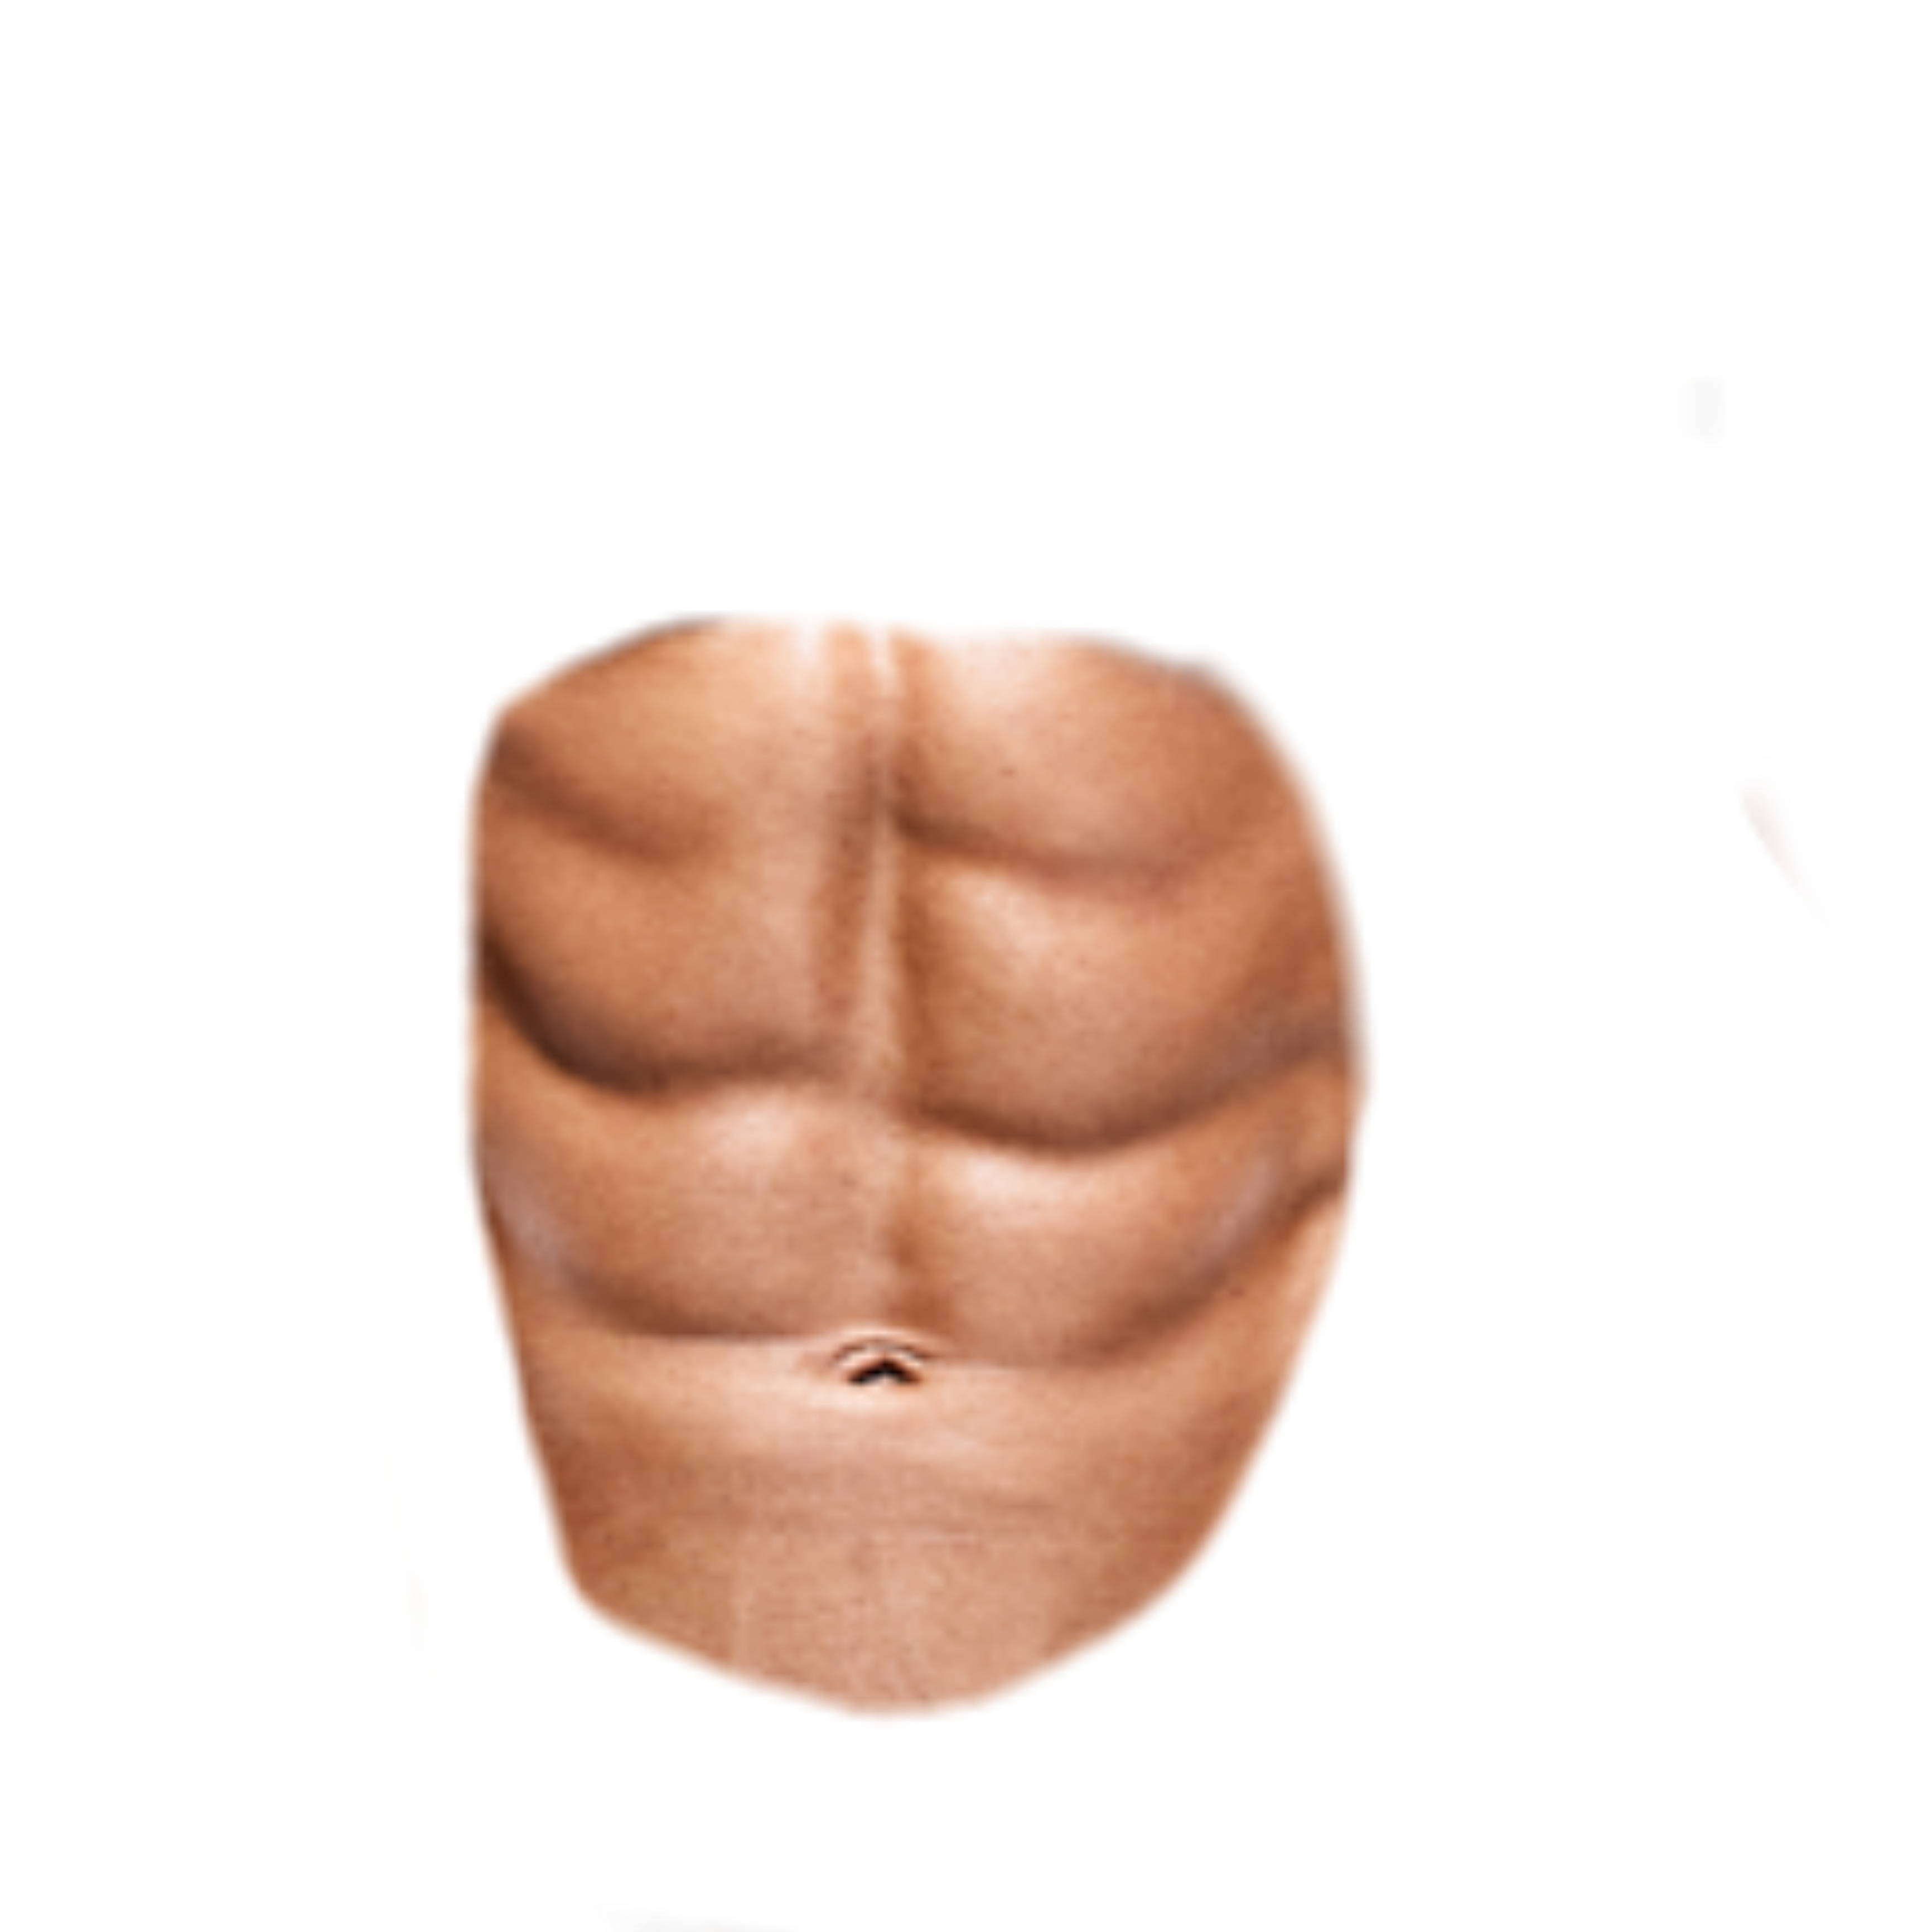 6 Pack Abs PNG File